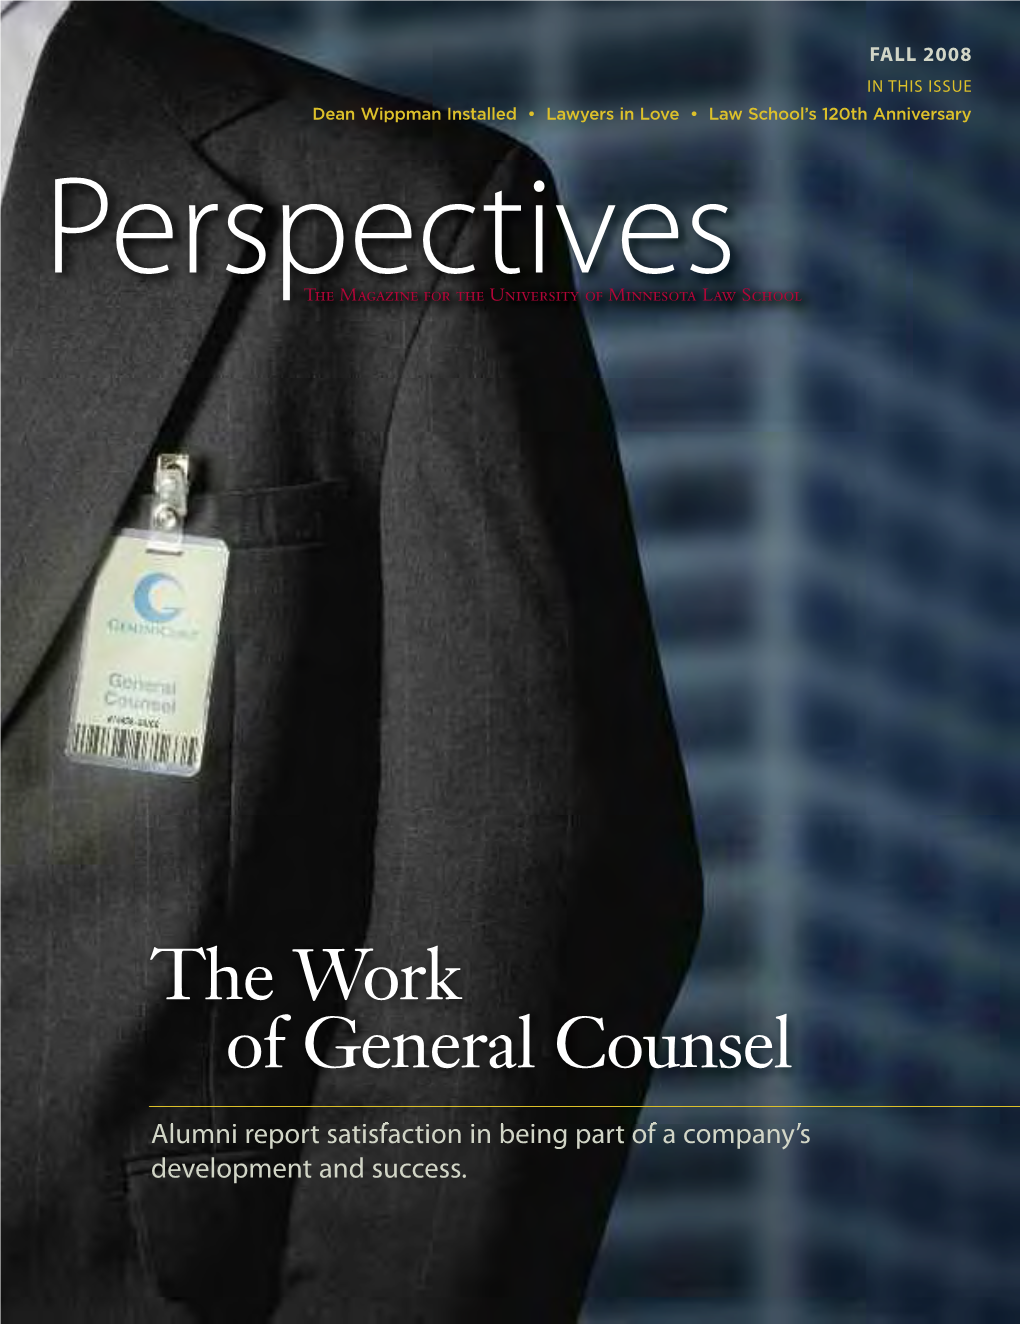 The Work of General Counsel